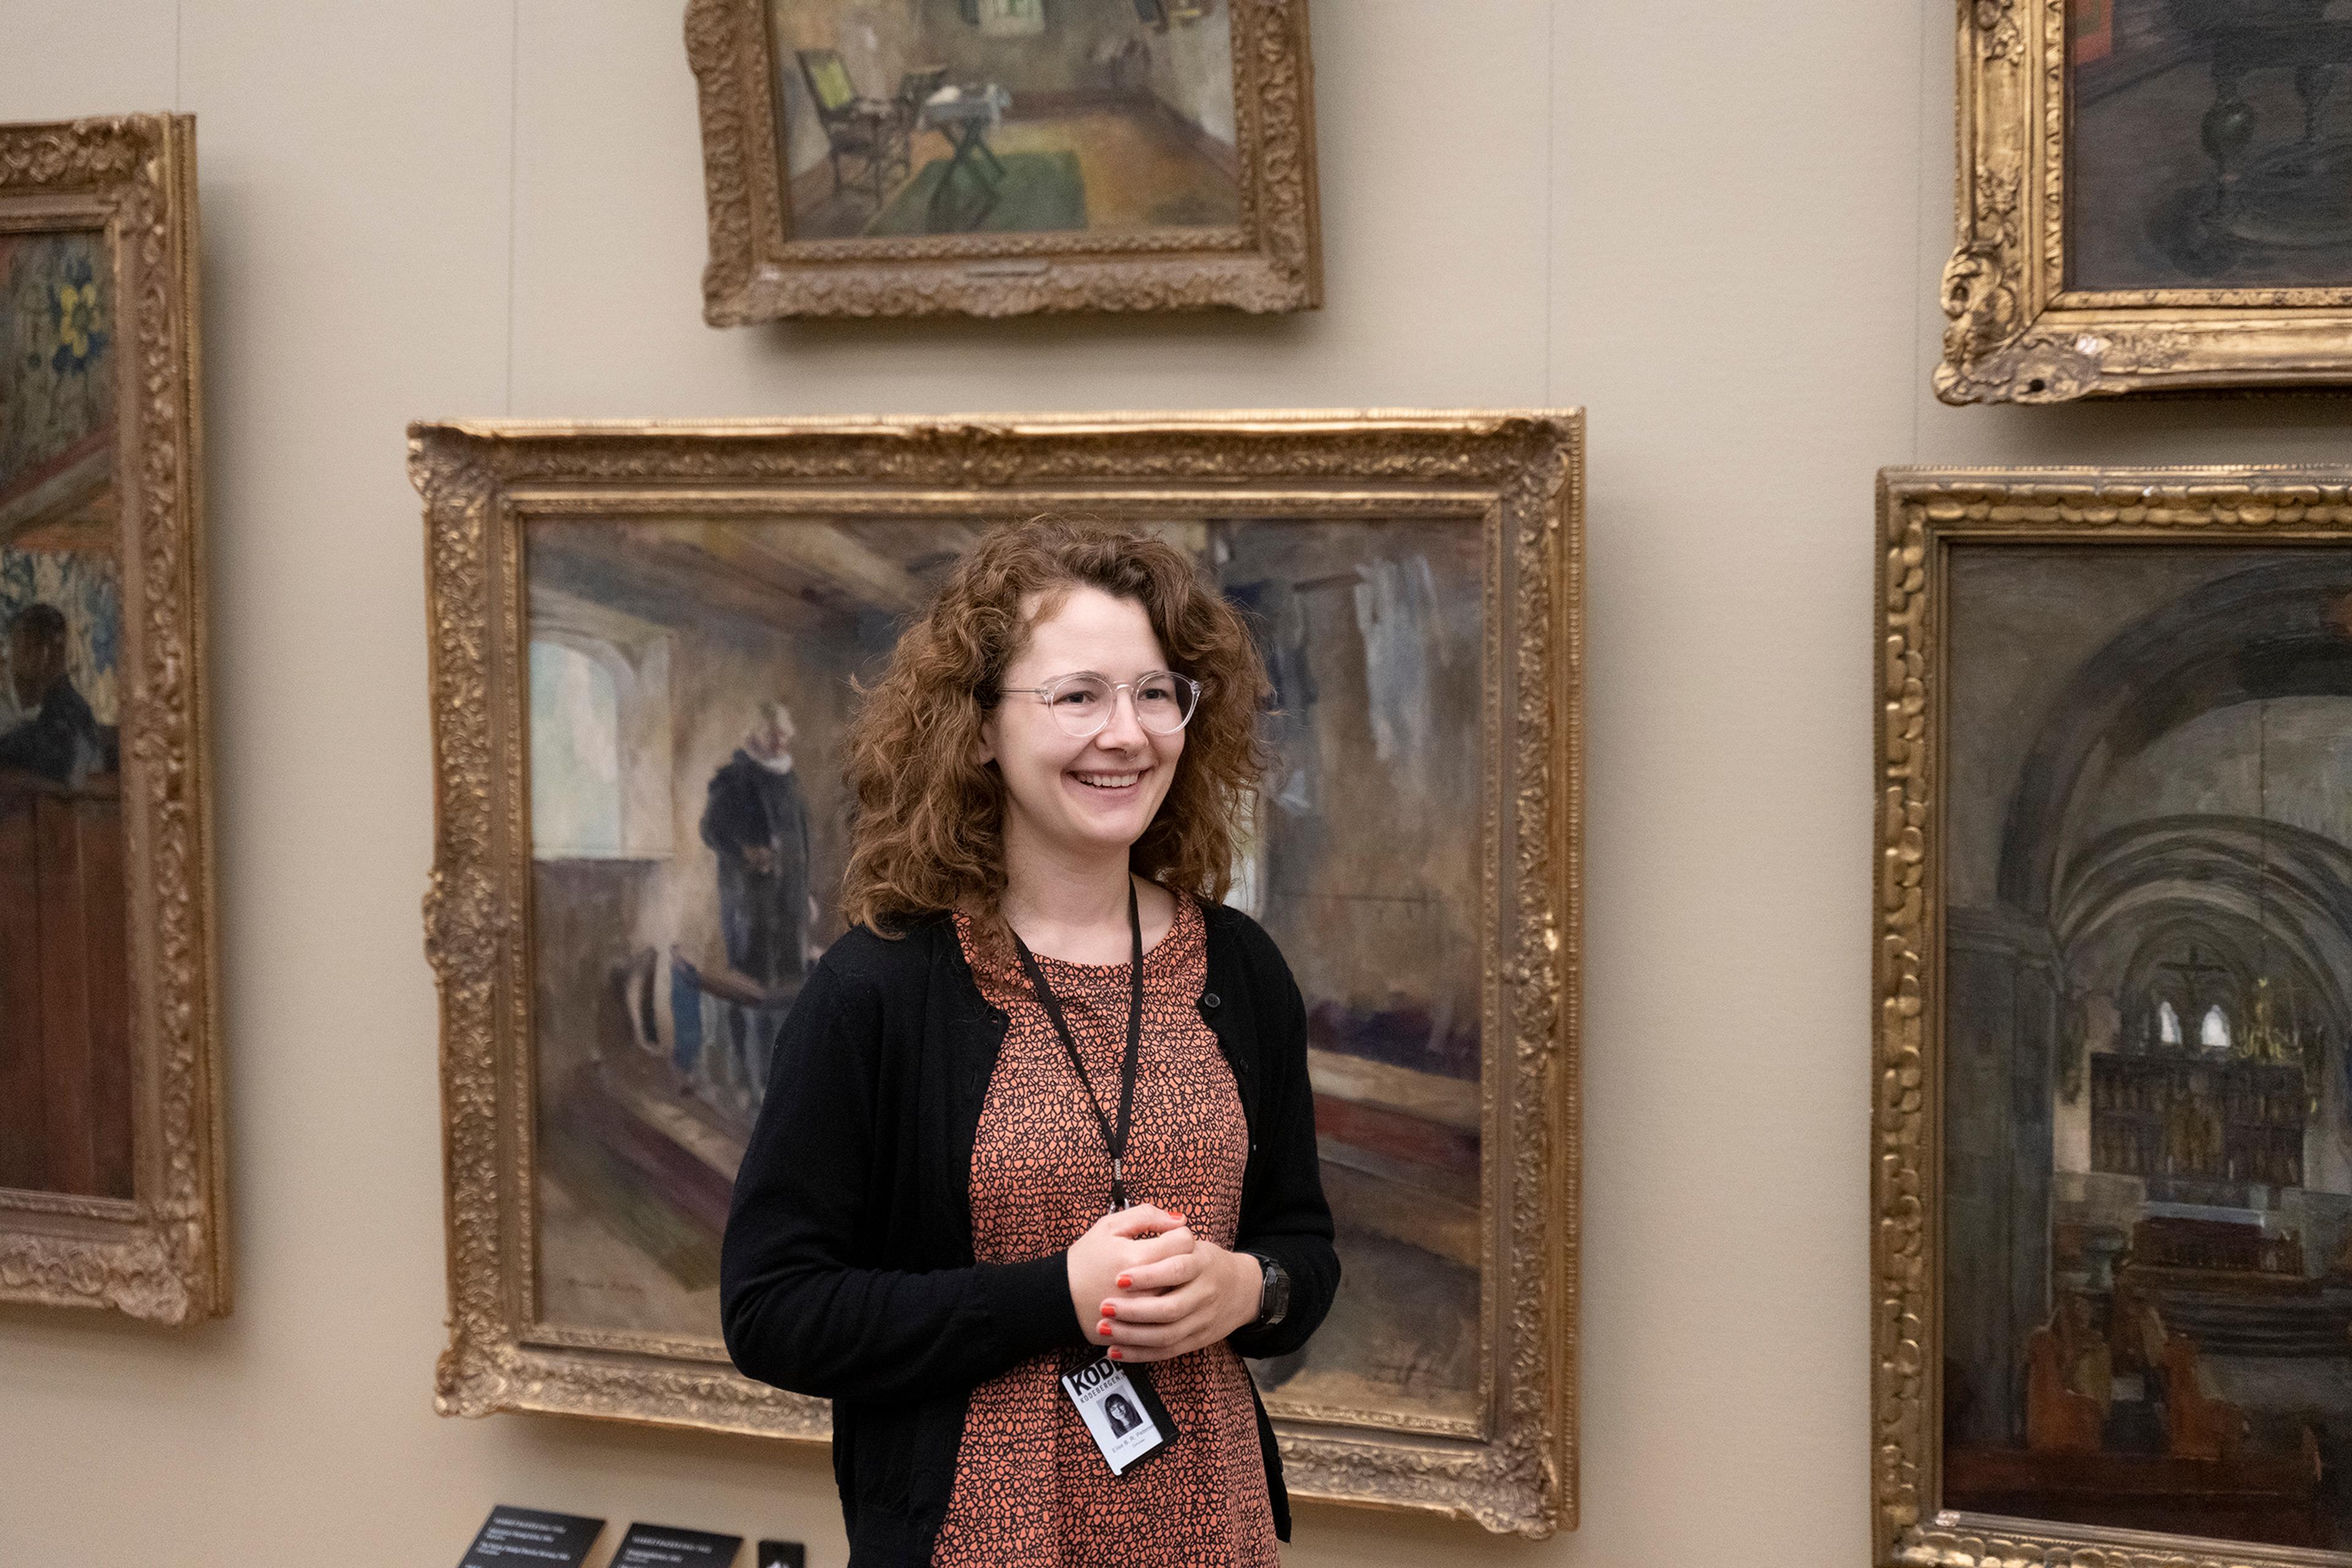 a woman is standing in front of a row of paintings, smiling